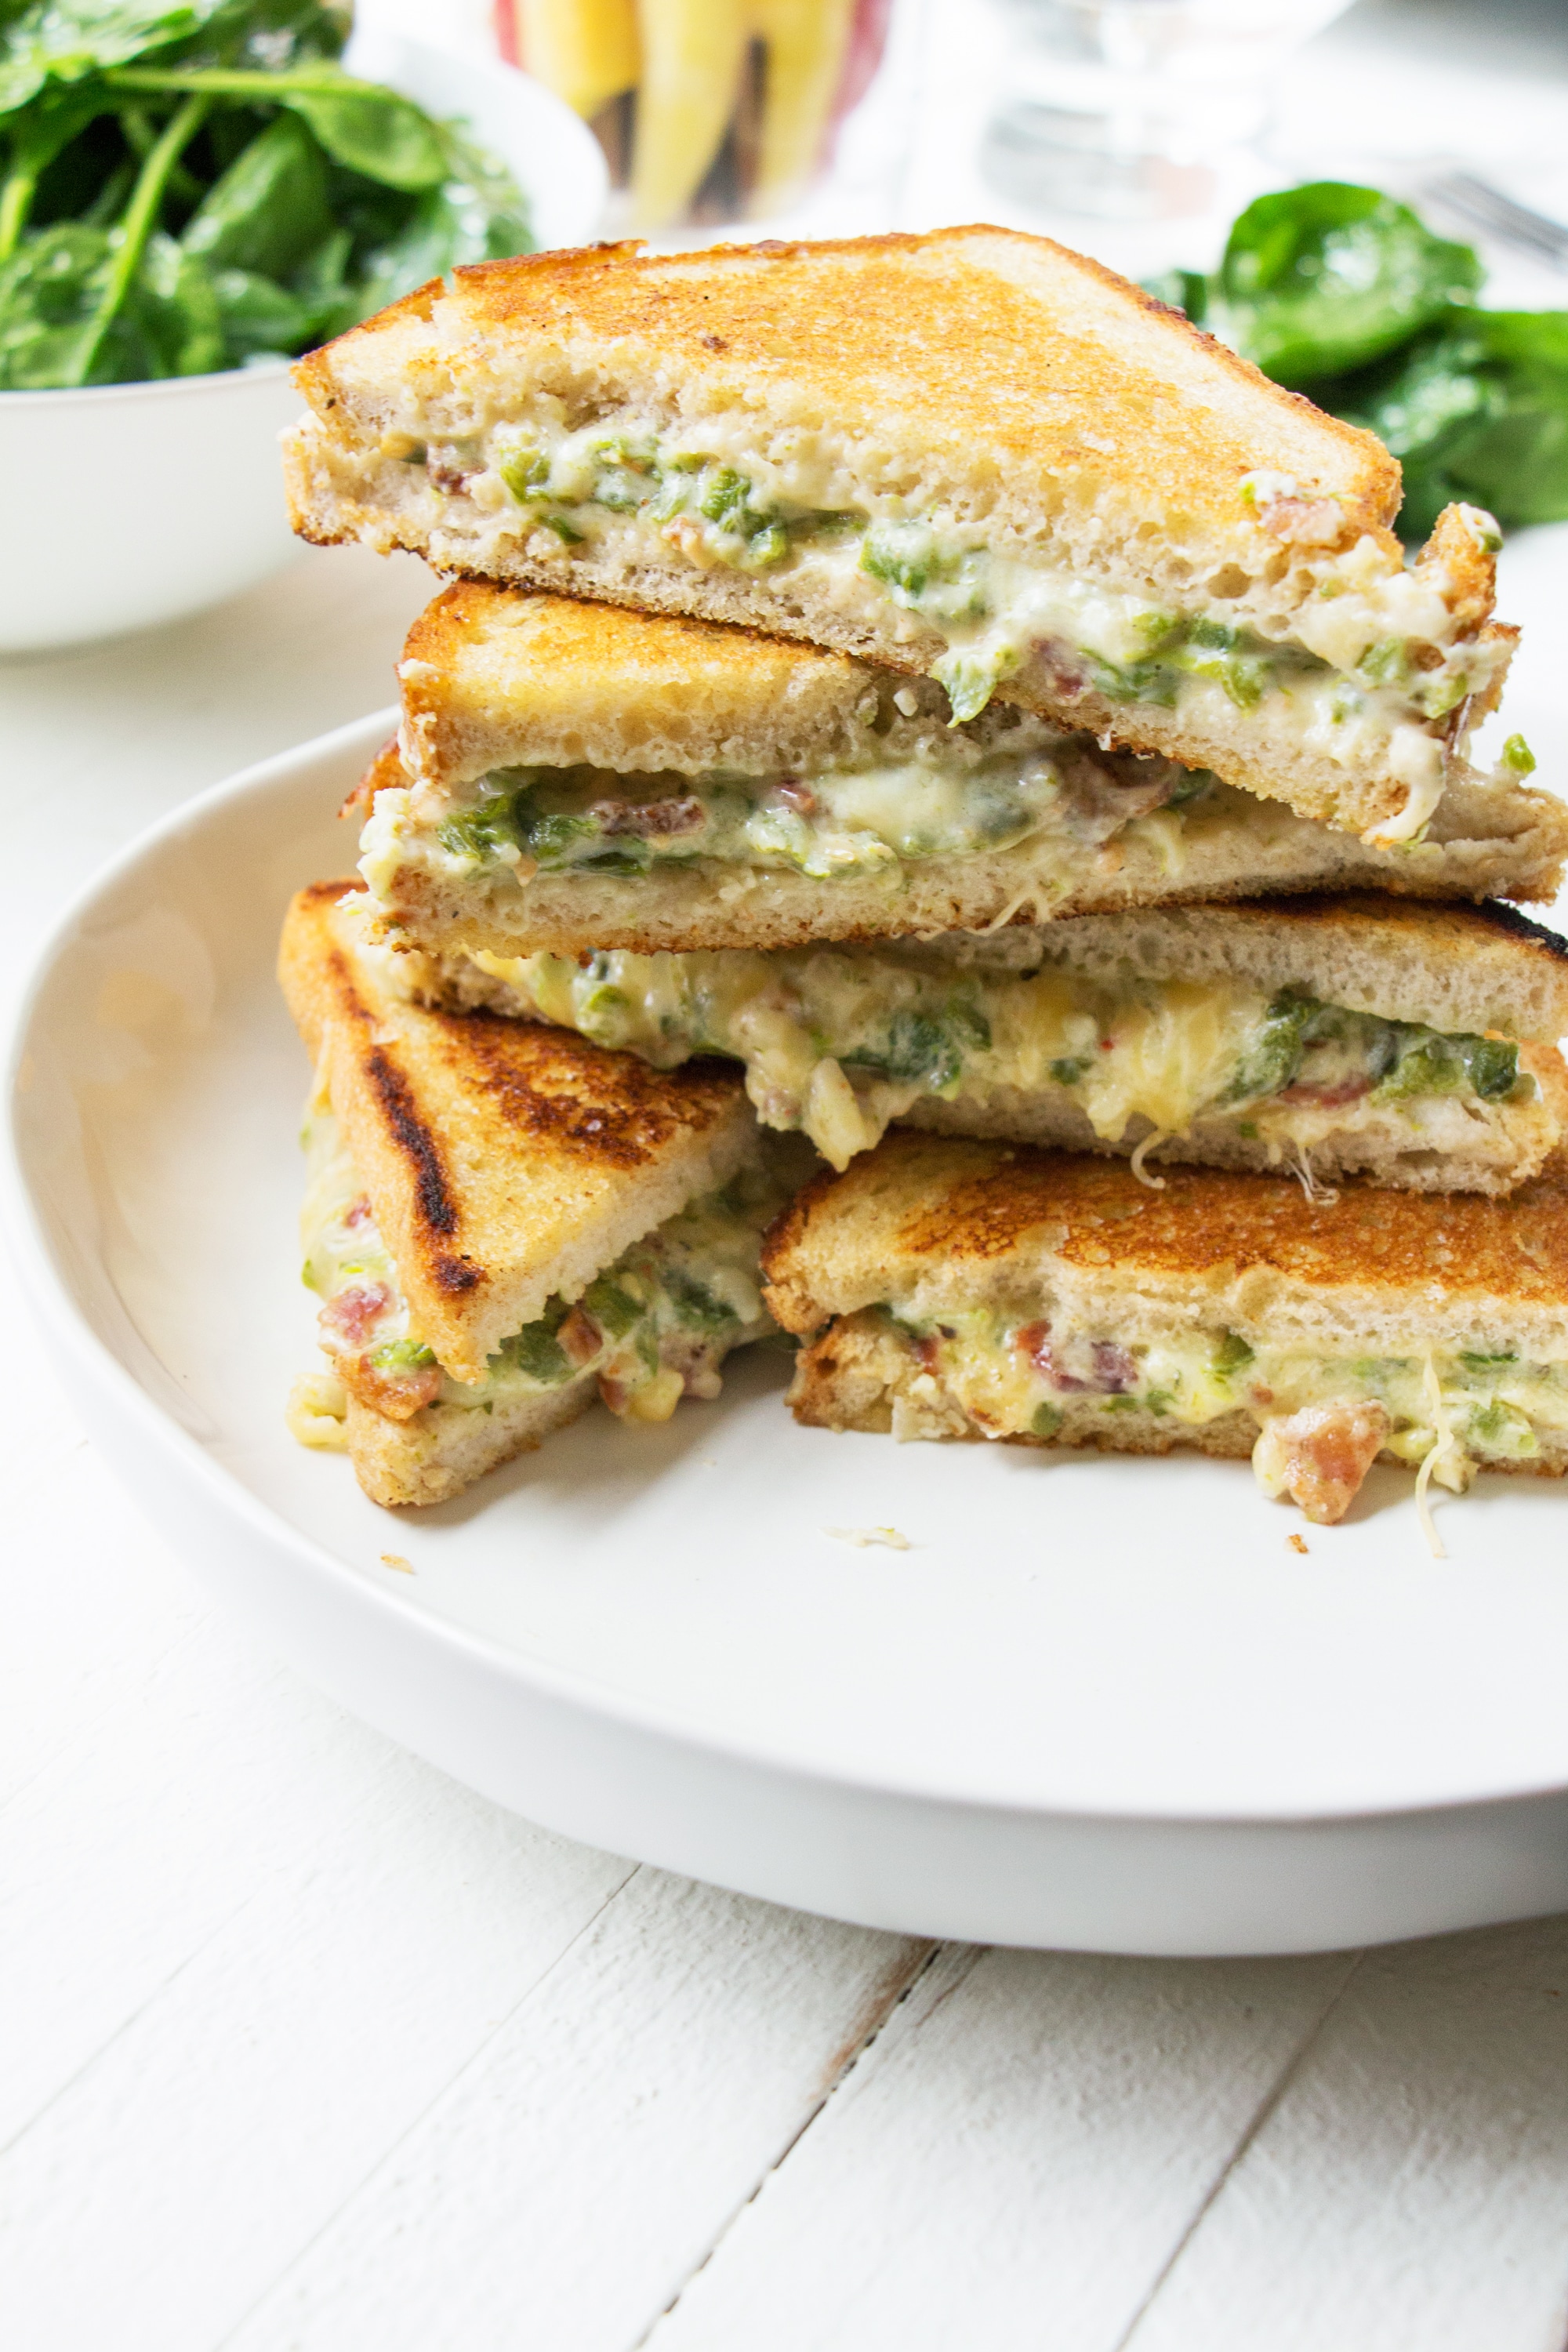 Stack of Jalapeno Popper Grilled Cheese sandwiches.